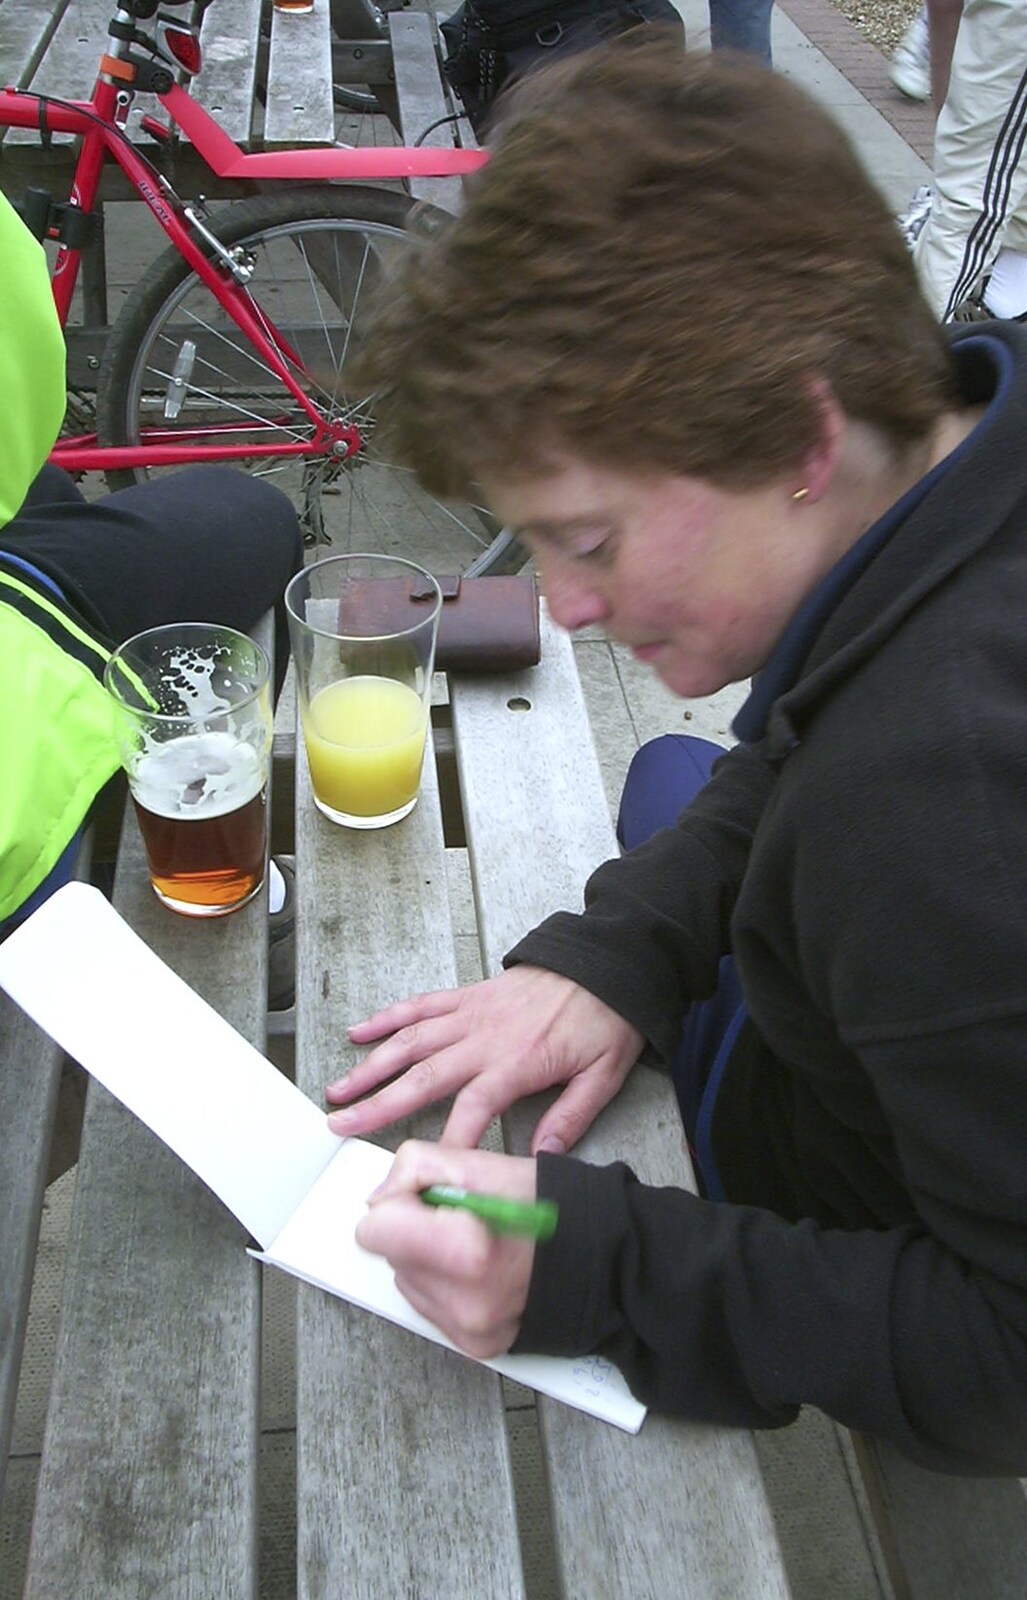 The BSCC Bike Ride, Shefford, Bedford - 11th May 2002: Pippa makes some notes